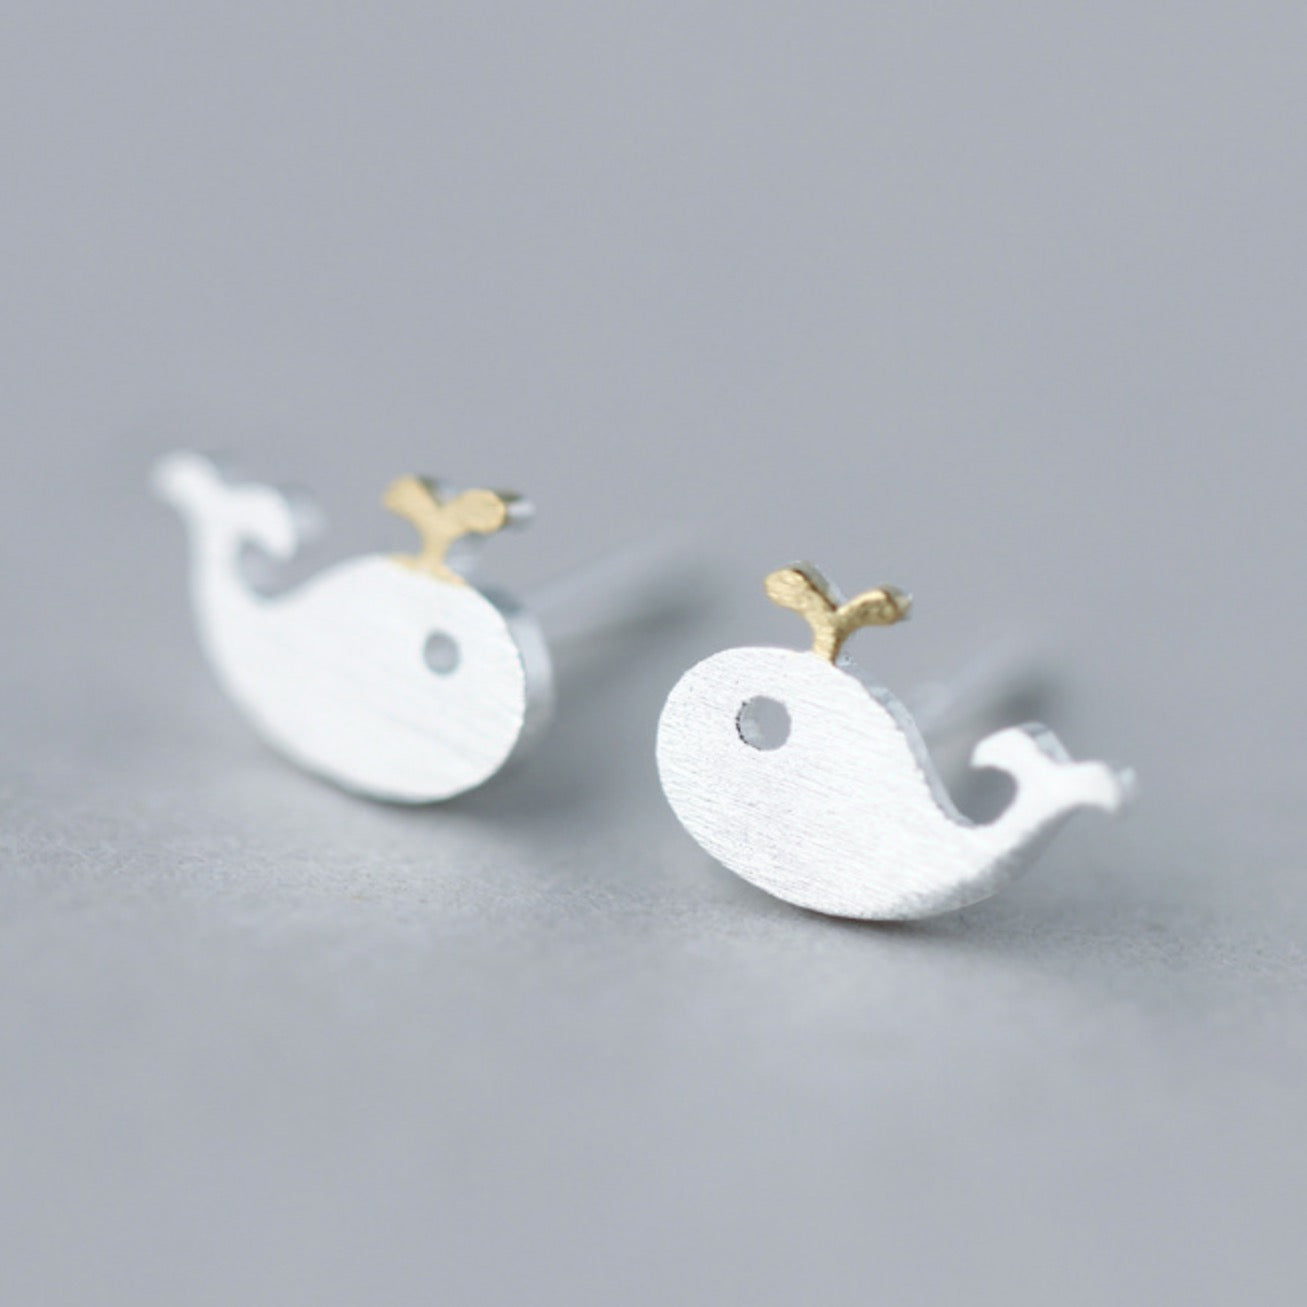 Brushed Silver Whale Stud Earrings